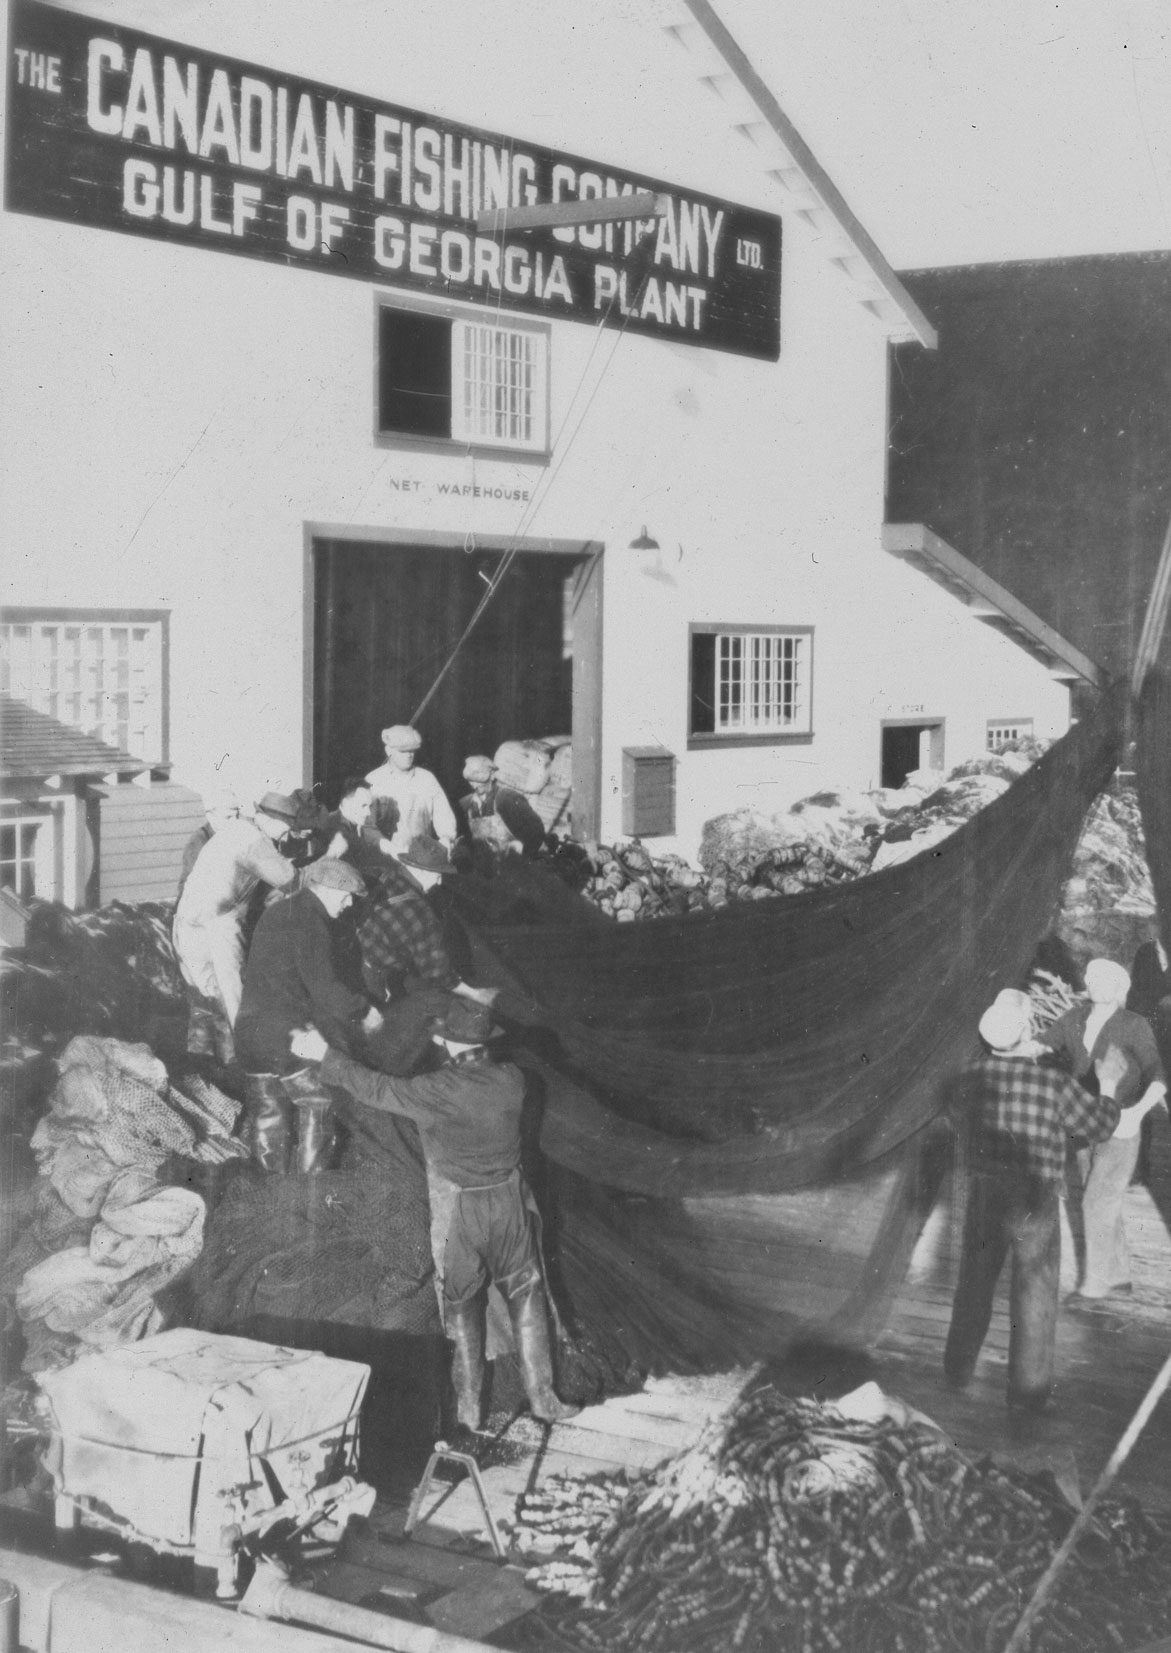 Several men are gathered around a net. A sign on the building reads "The Canadian Fishing Company Ltd. Gulf of Georgia Plant."